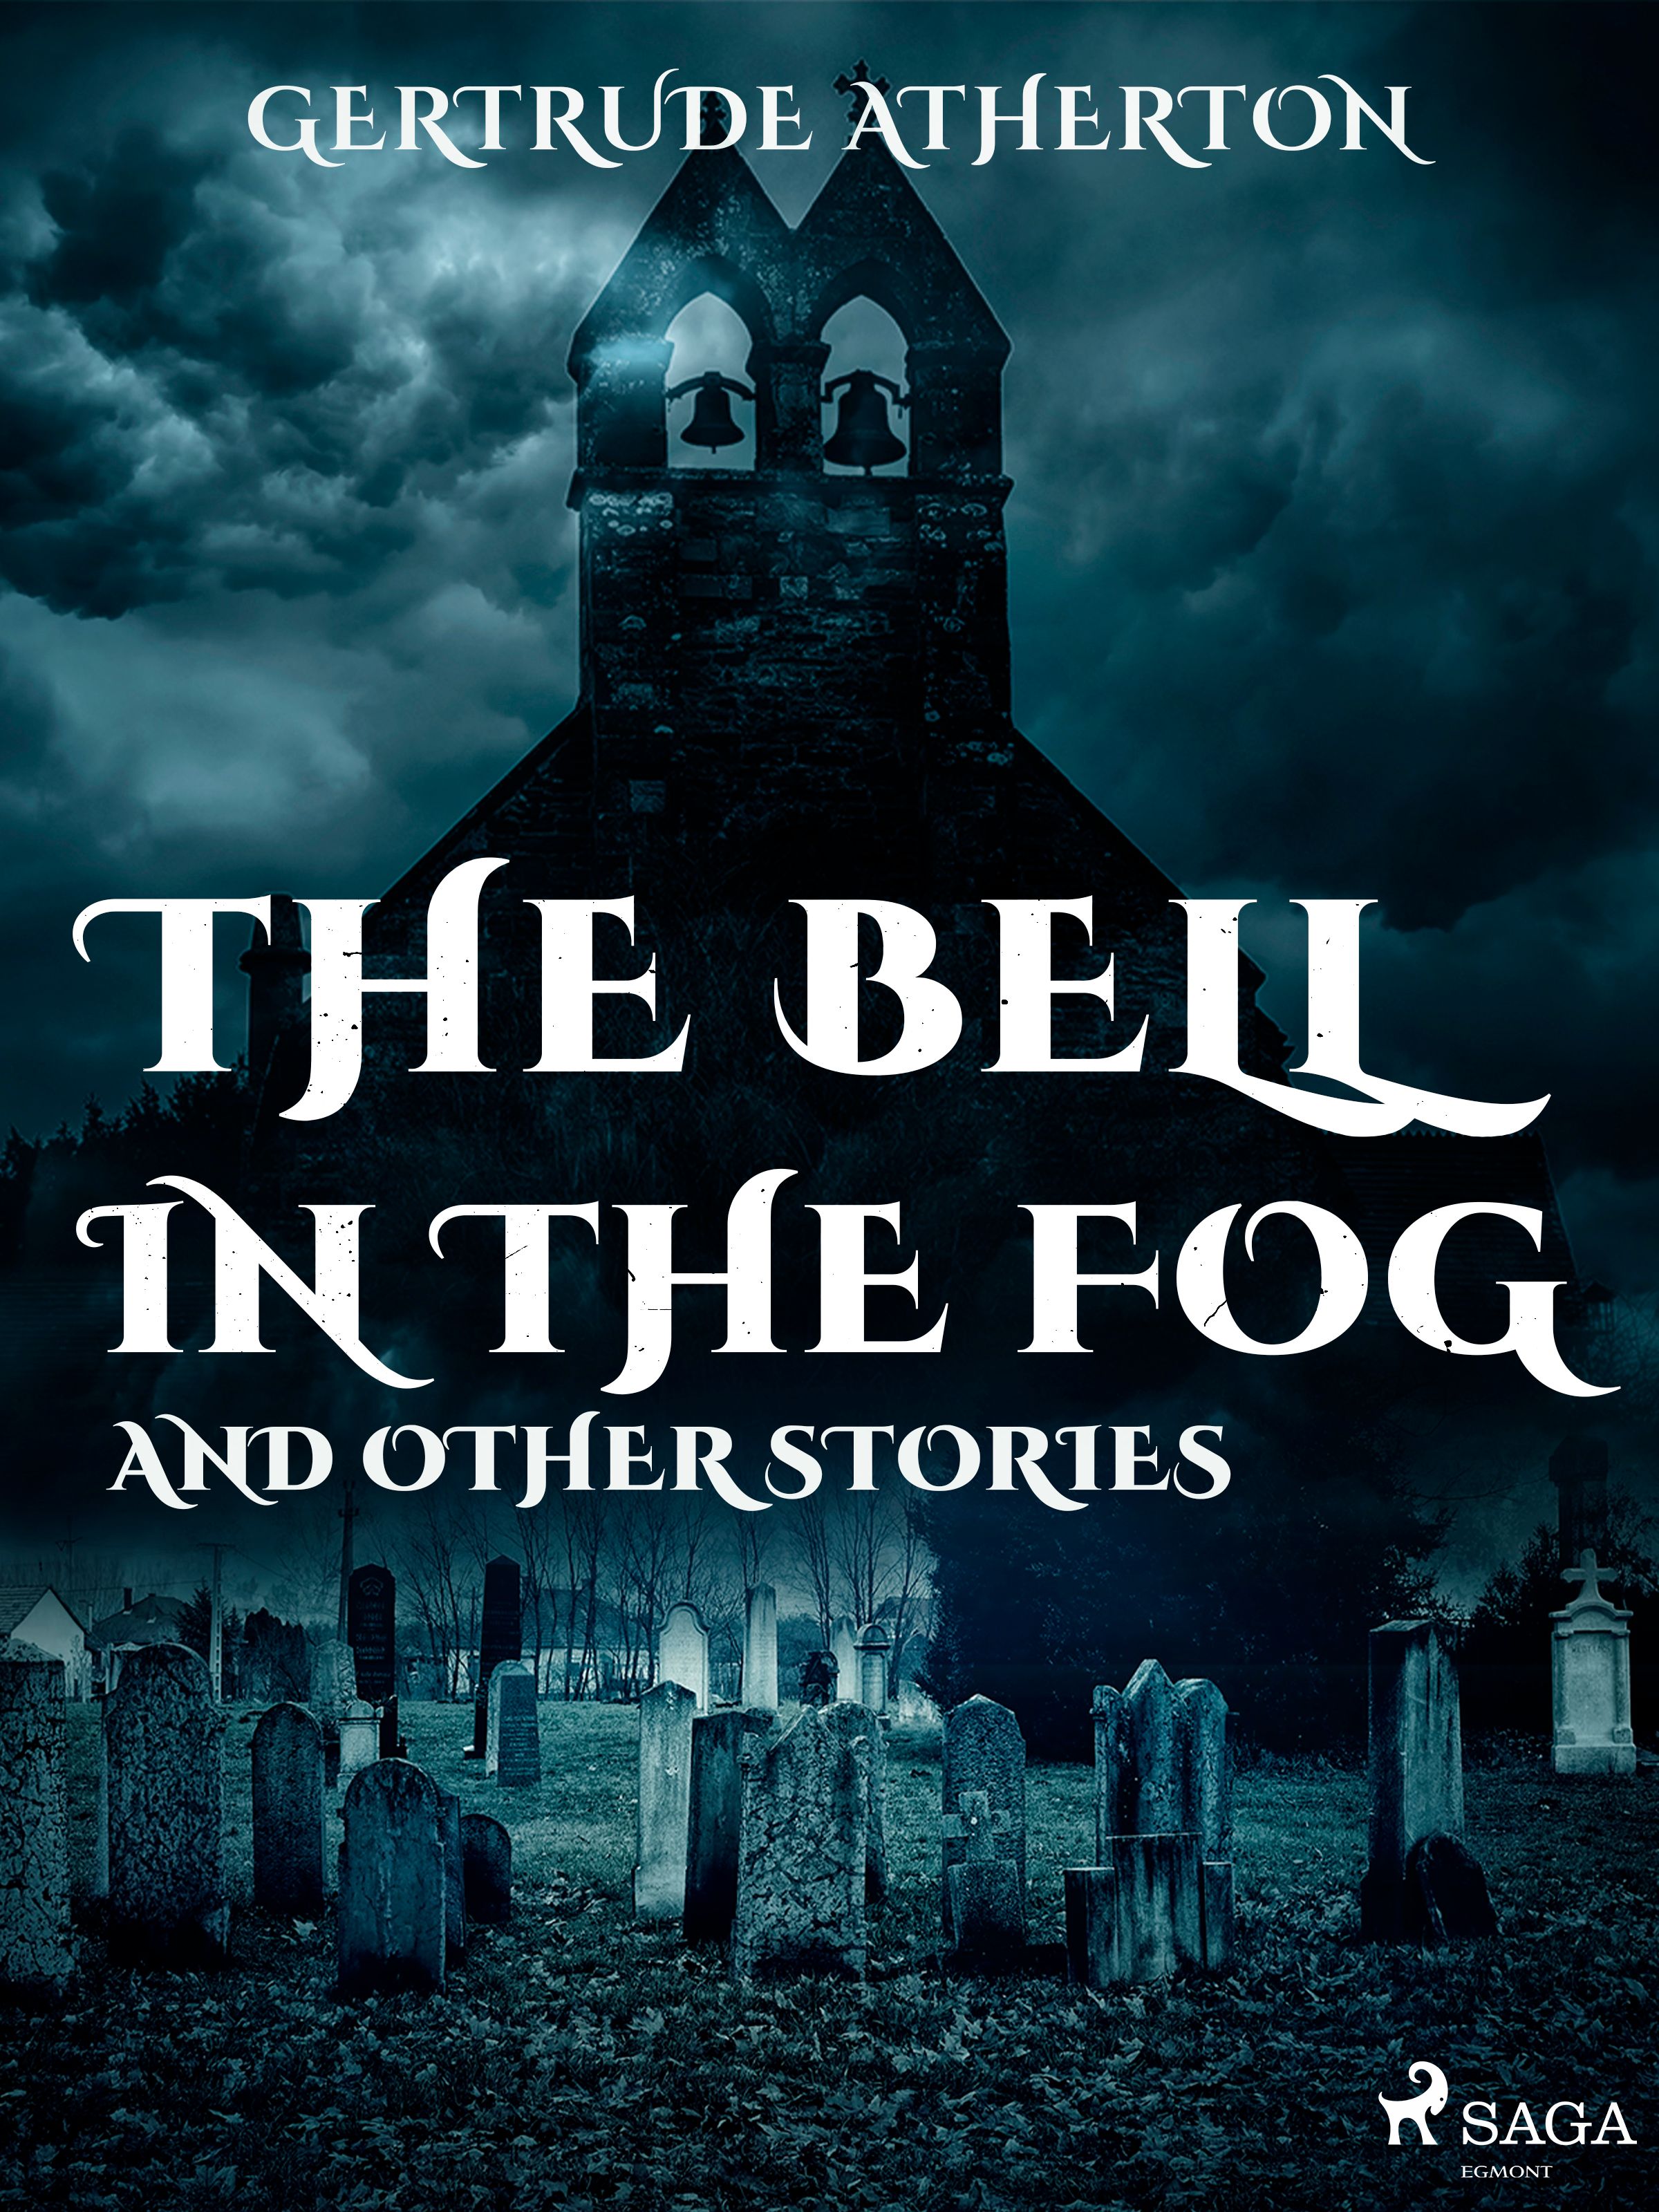 The Bell in the Fog, and Other Stories, eBook by Gertrude Atherton